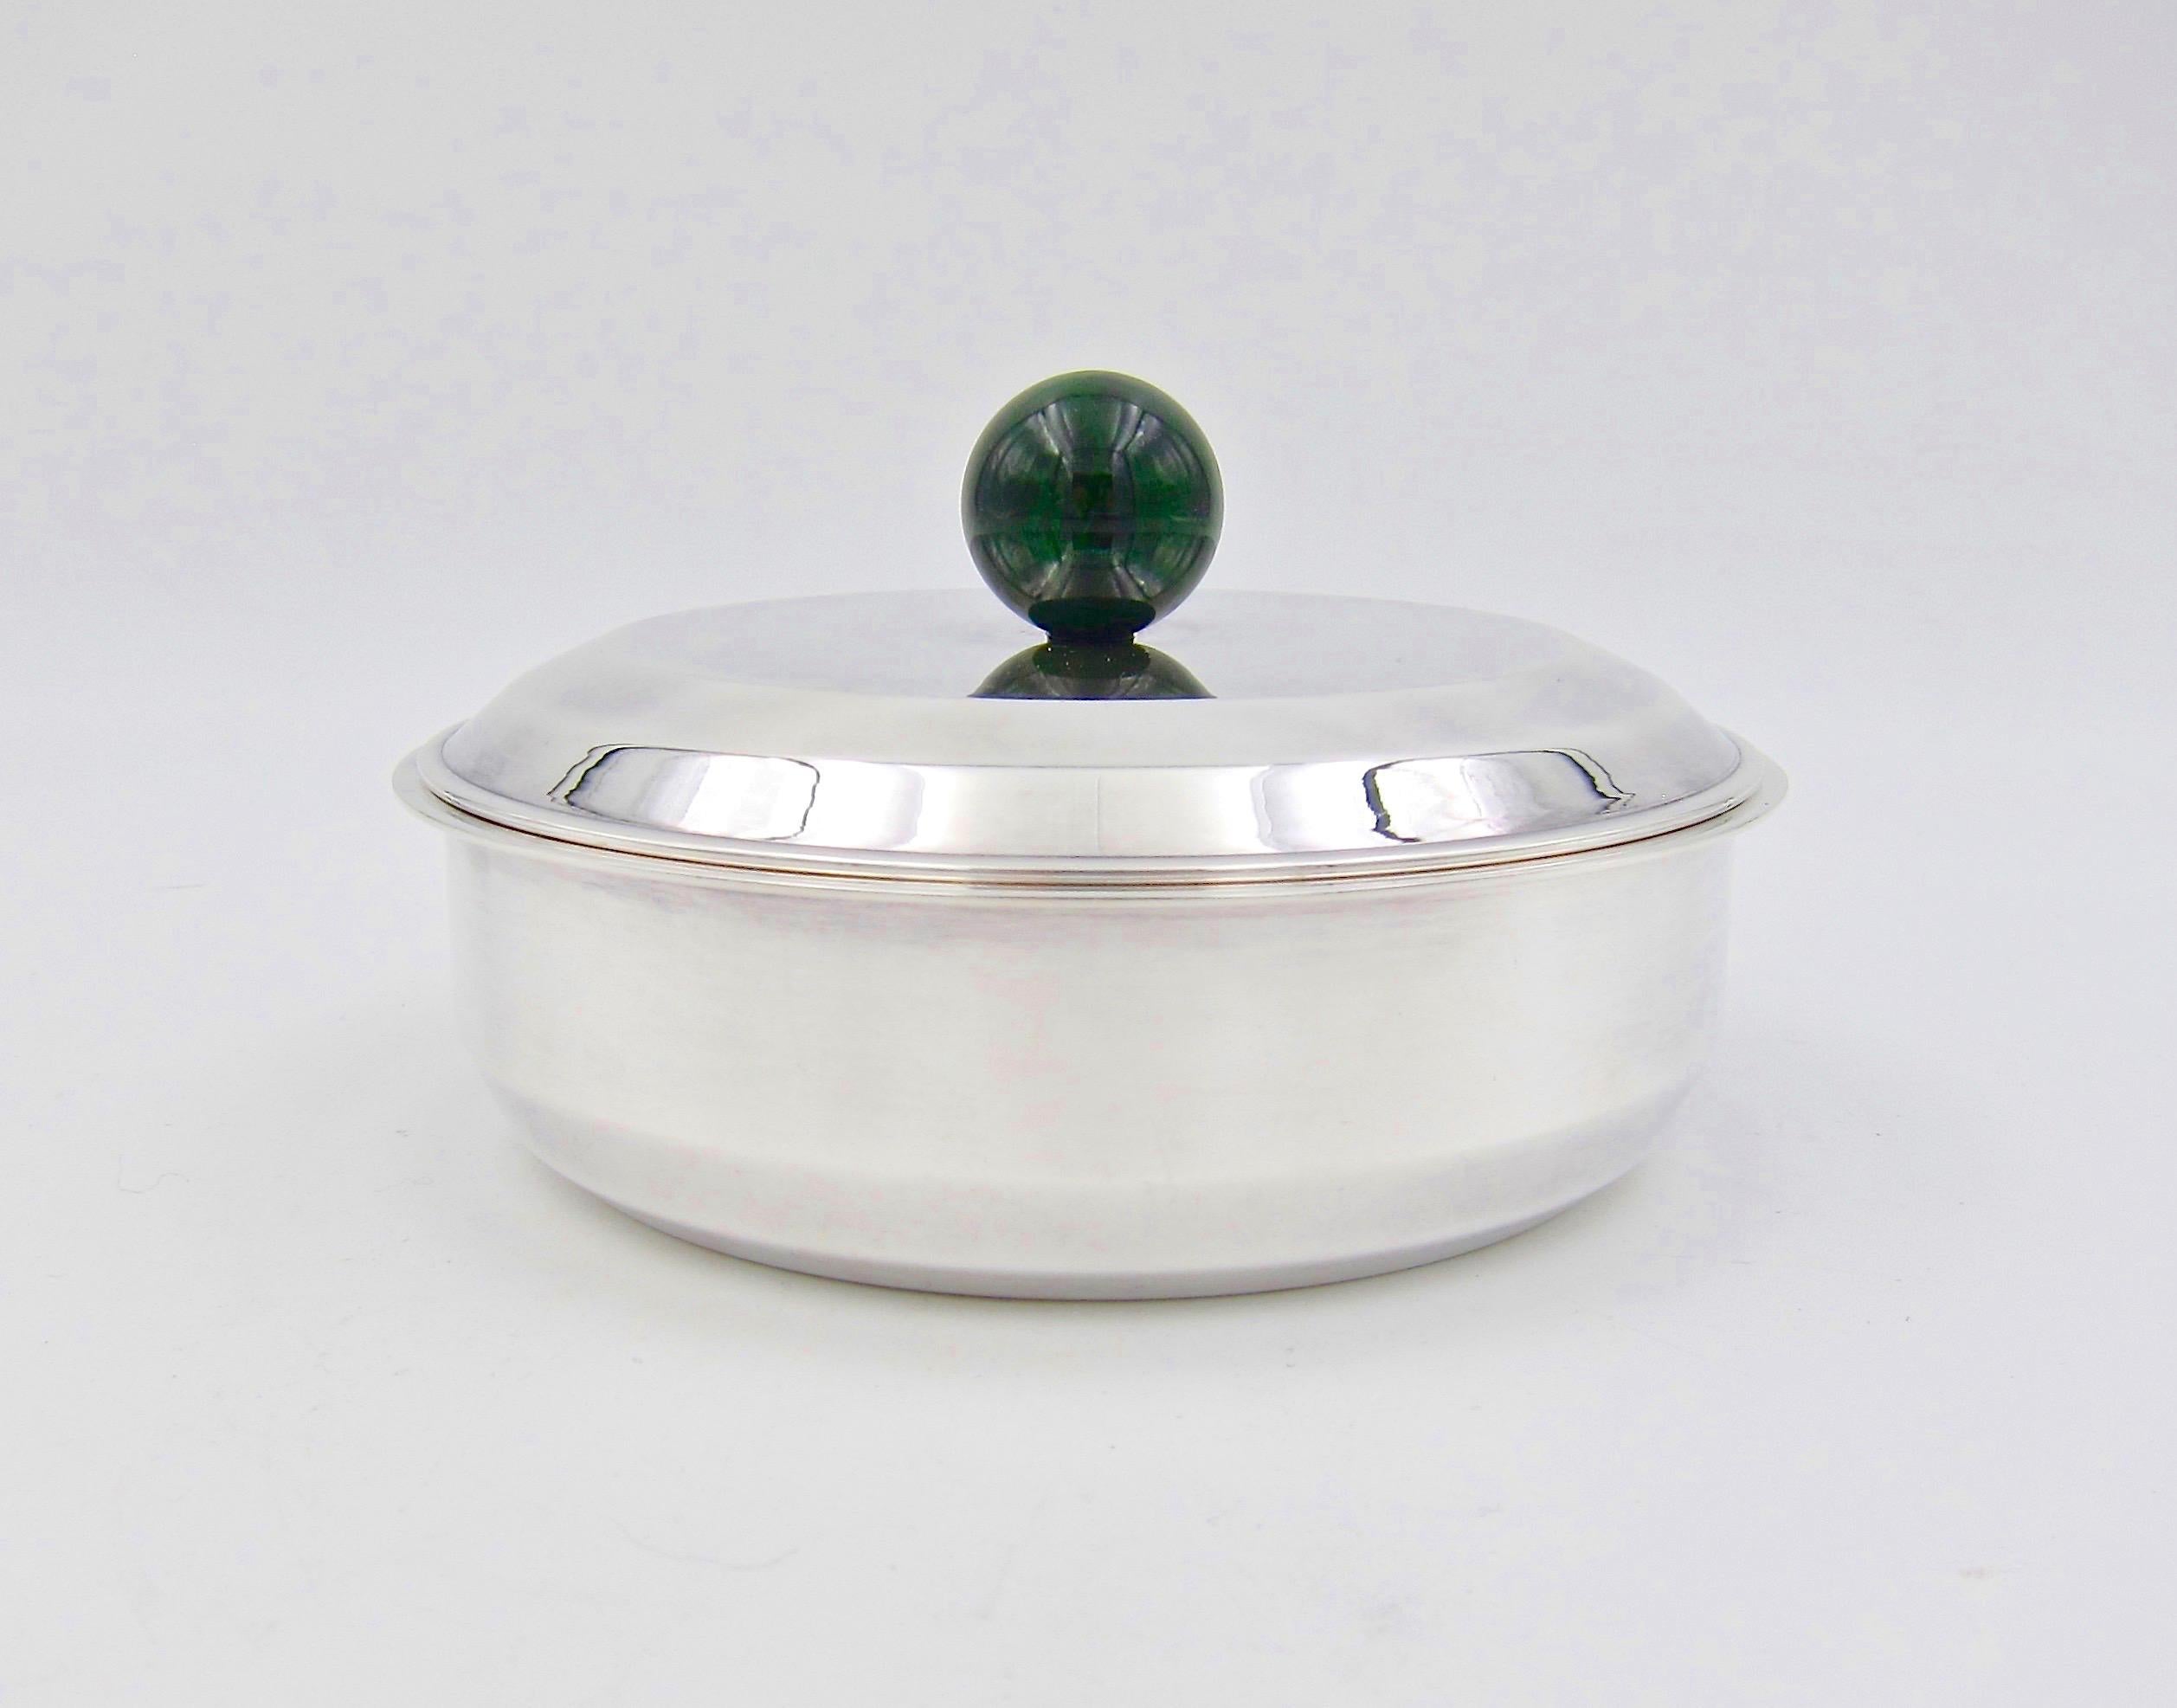 A French Art Deco bonbonnière box designed by Jean-Emile Puiforcat (1897-1945) in silver-plate with a spherical veined dark green finial, dating circa 1930s. The elegant covered box is an ideal accessory for a vanity, dresser, nightstand, or desk.